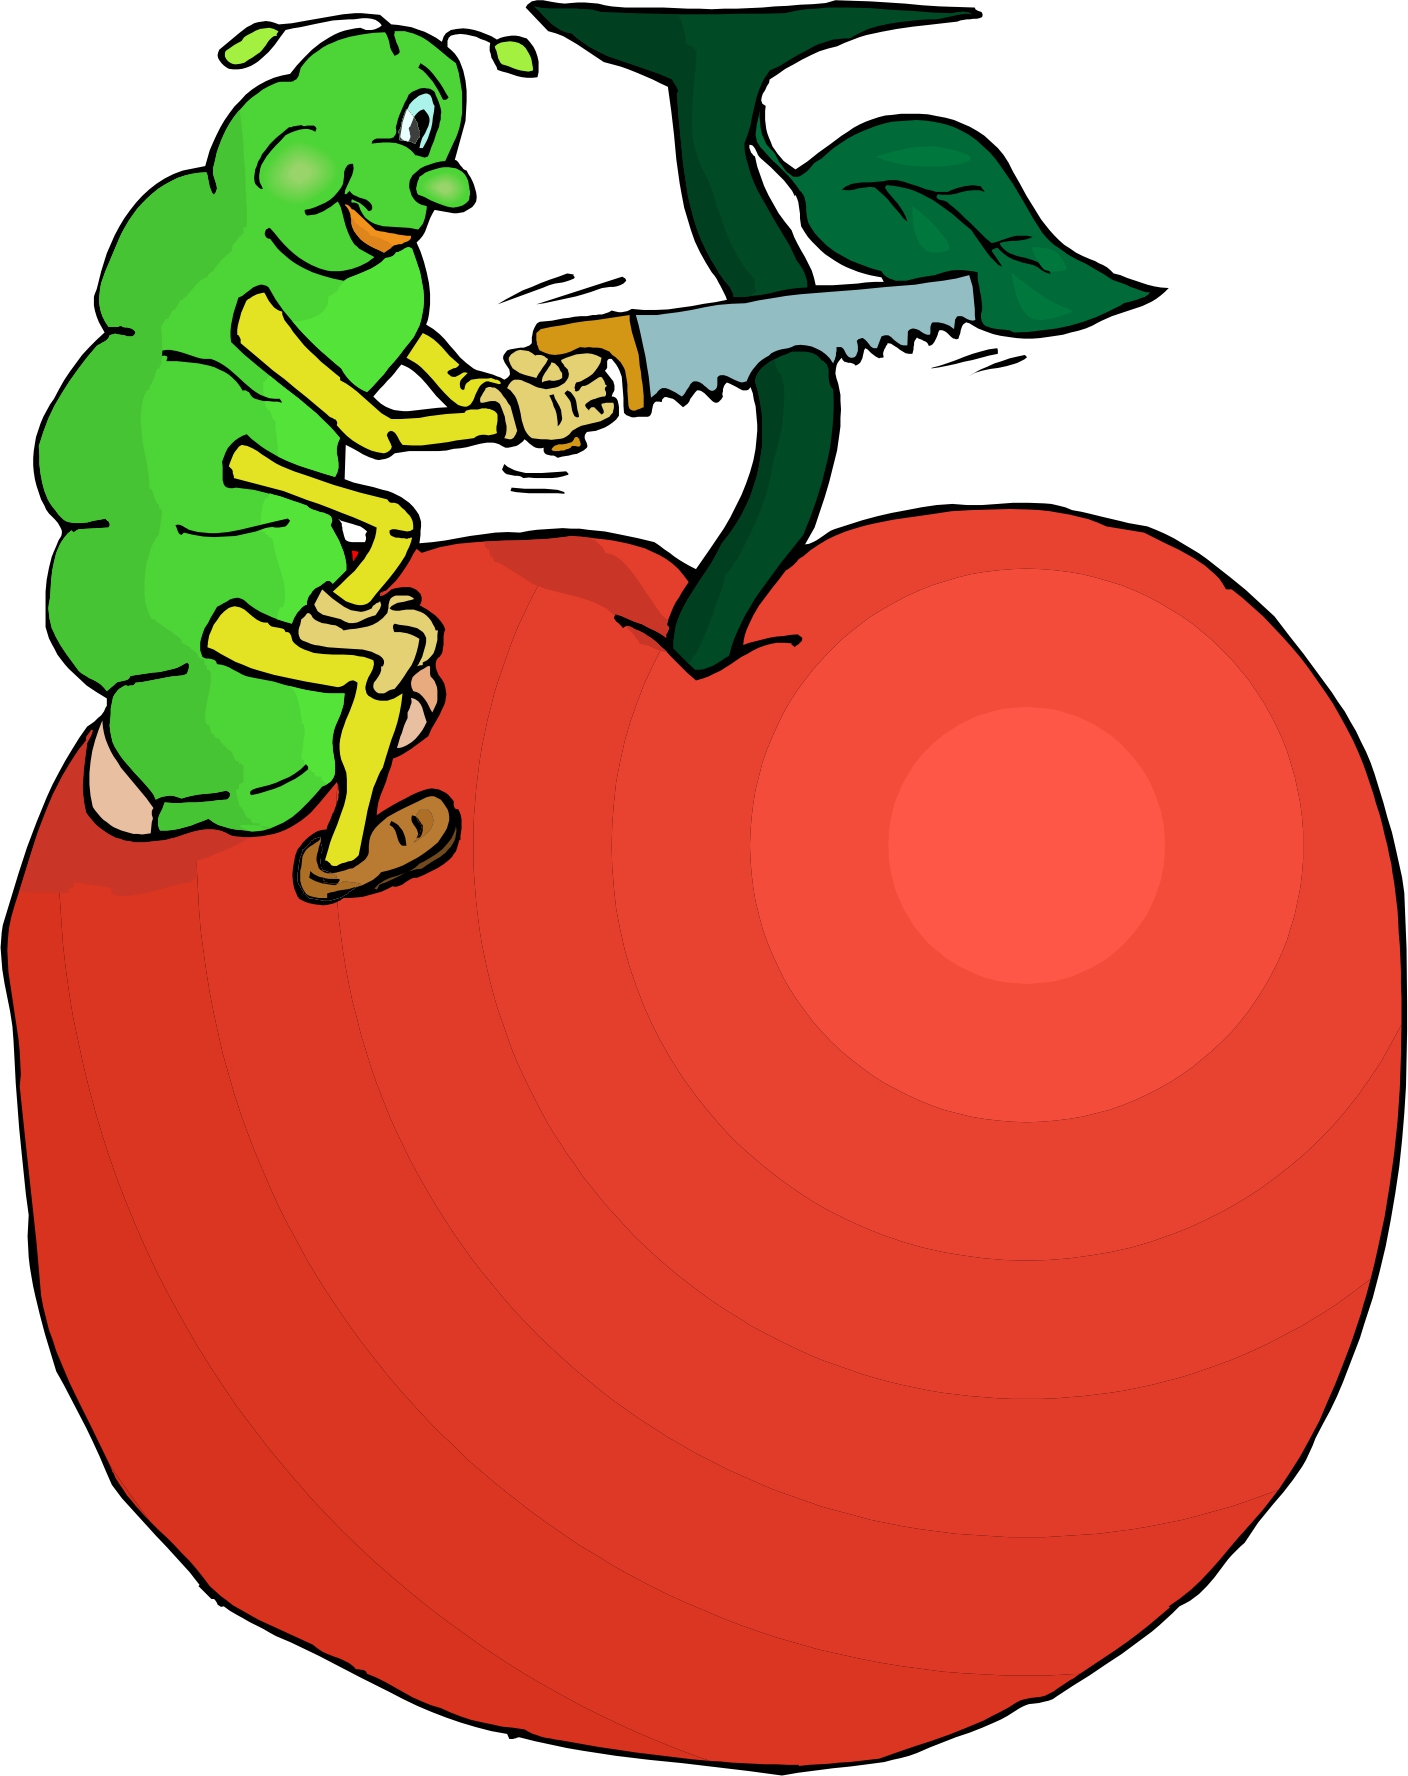 apple with worm clip art free - photo #13